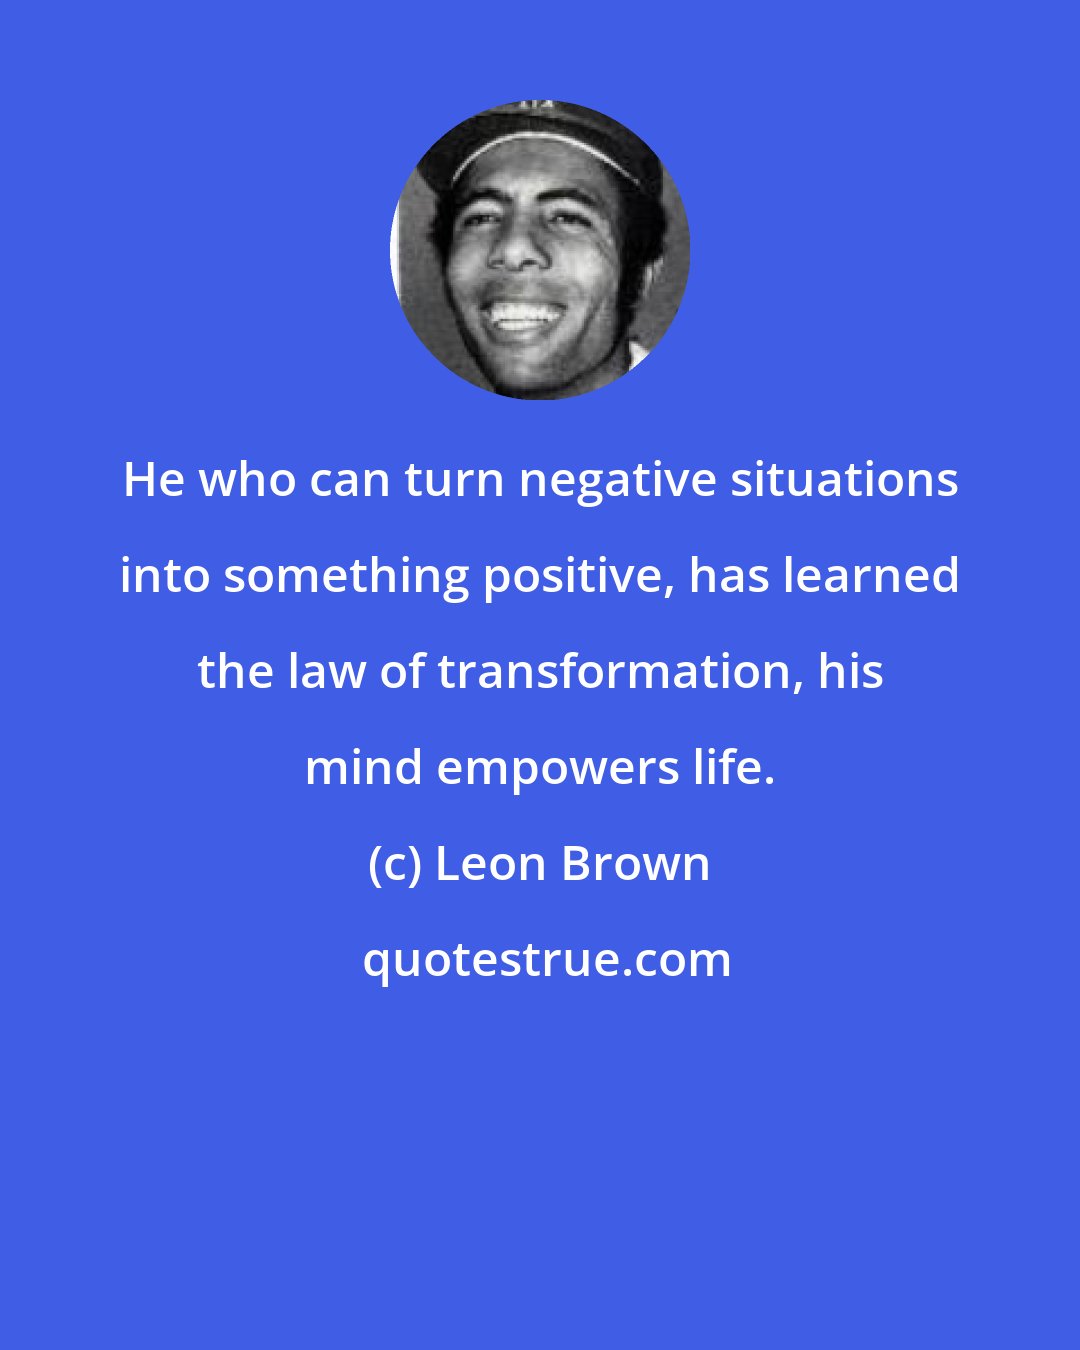 Leon Brown: He who can turn negative situations into something positive, has learned the law of transformation, his mind empowers life.